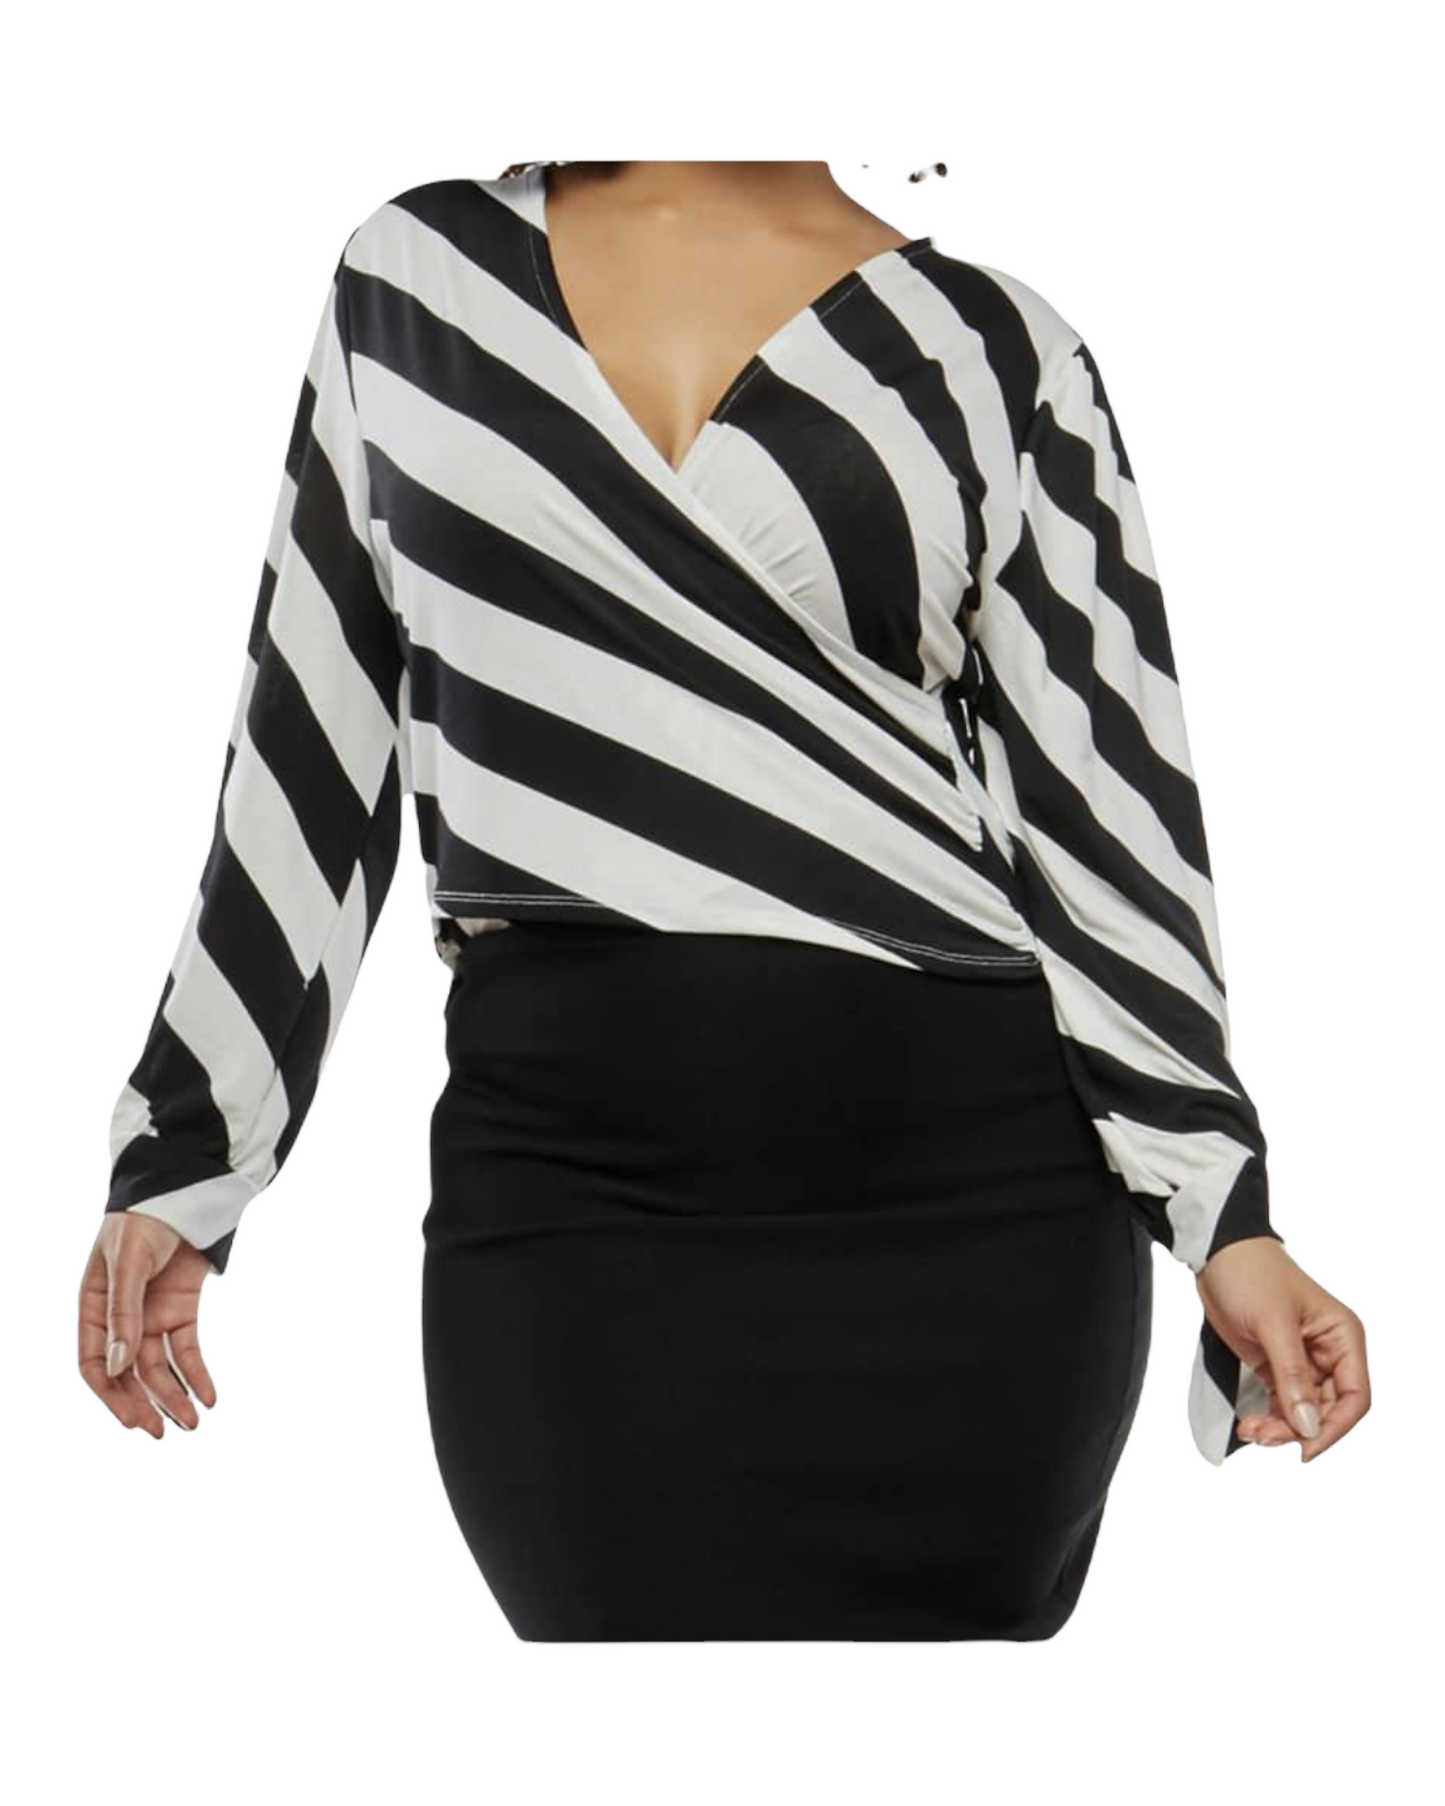 Two-Toned Top - Plus Size